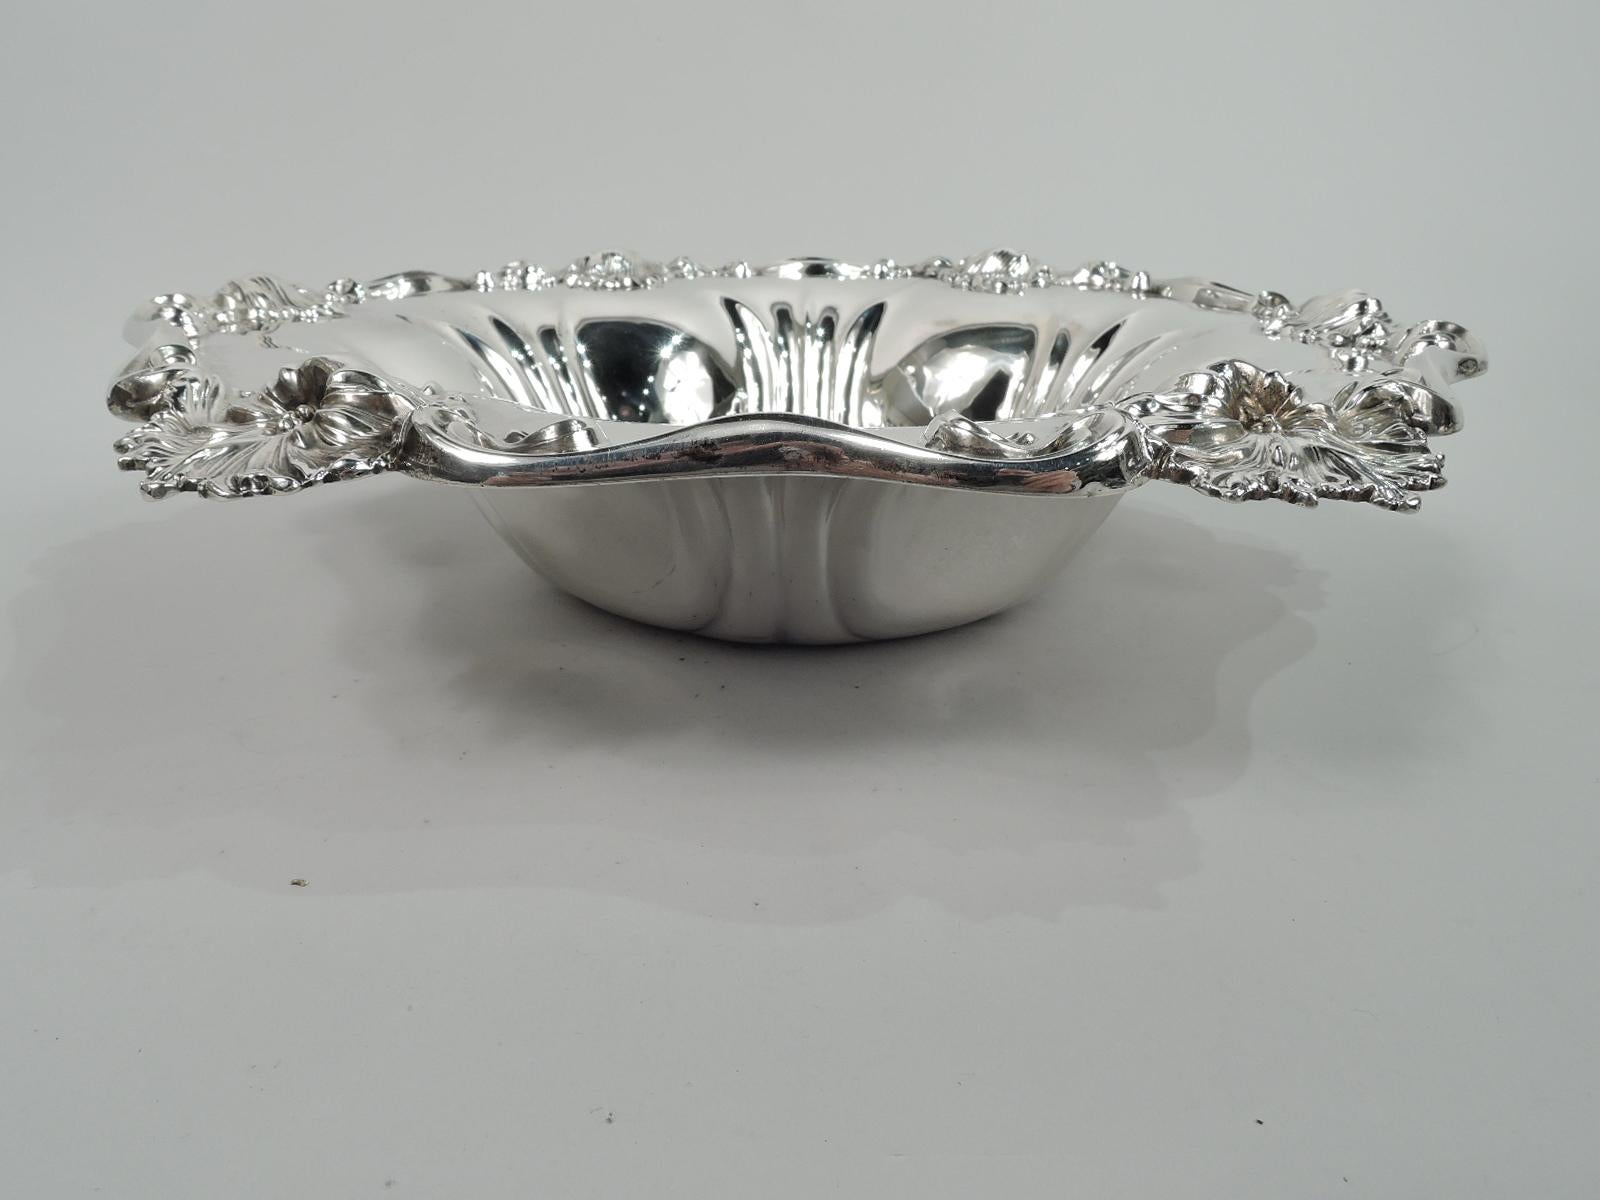 Turn-of-the-century Art Nouveau sterling silver bowl. Made by Meriden Britannia (part of International) in Connecticut. Round well engraved with interlaced script monogram. Sides tapering and fluted. Scrolled rim with fluid and splayed flower heads.